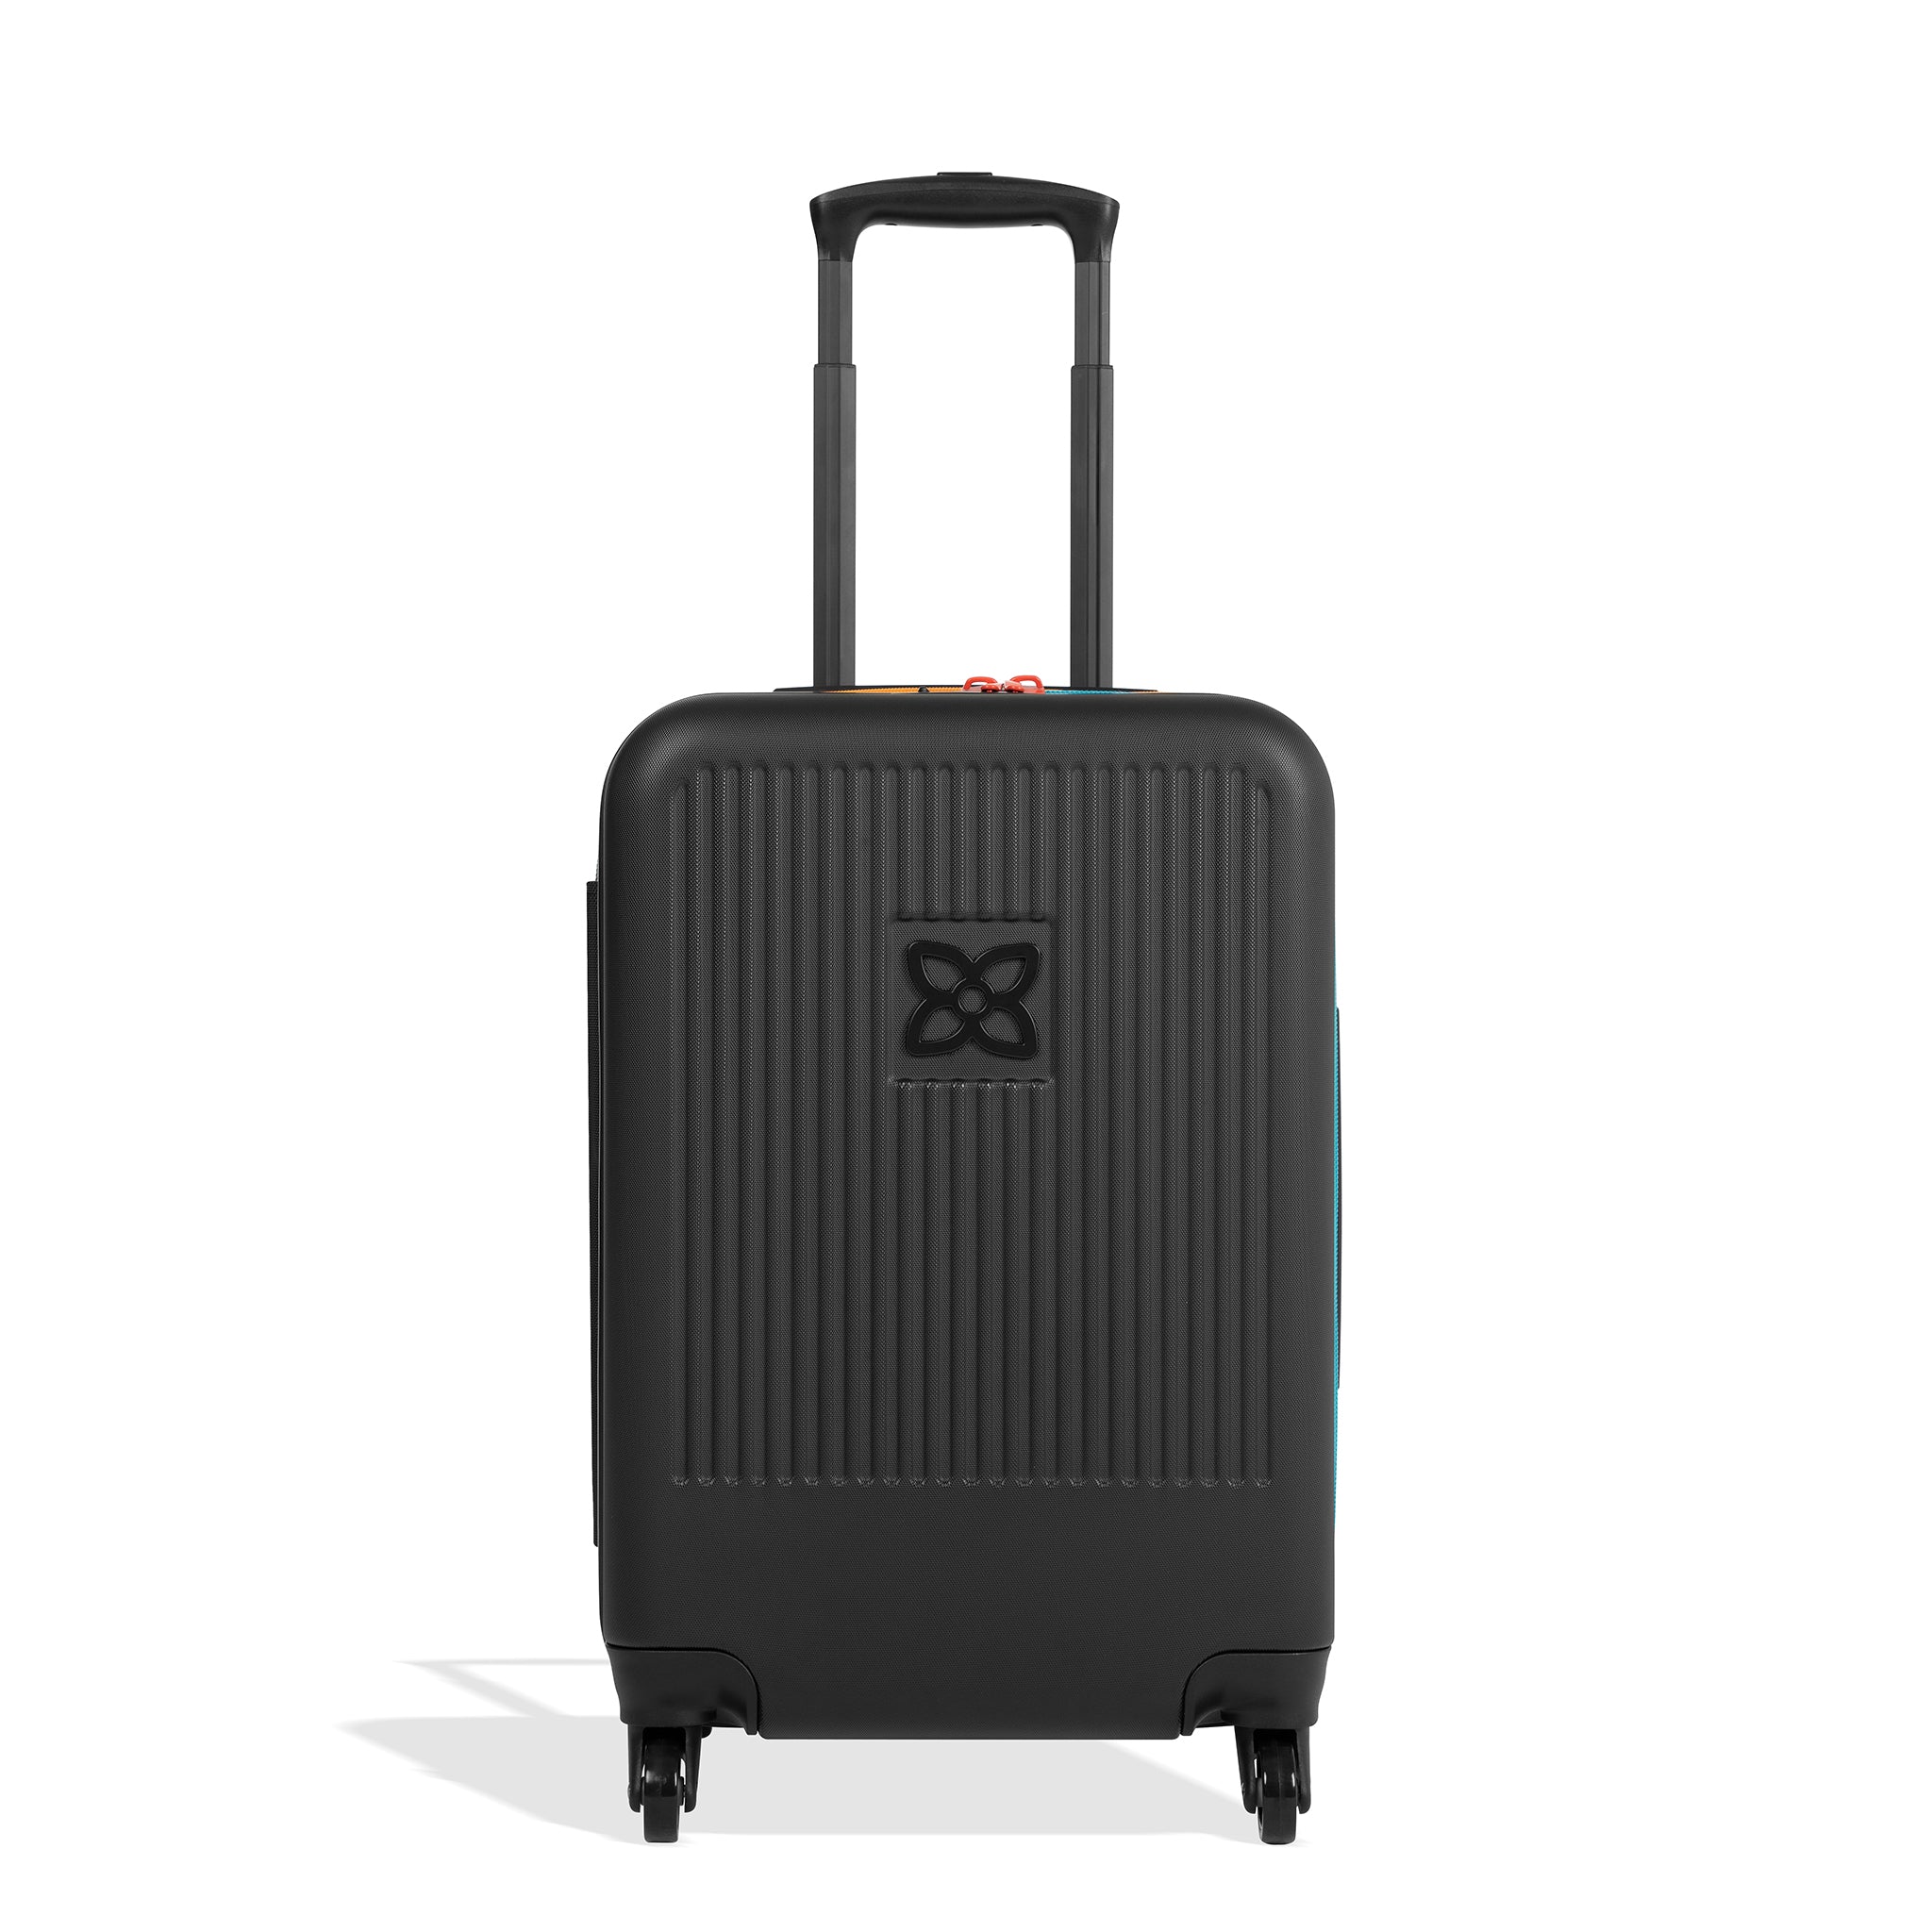 Flat front view of Sherpani hard-shell carry-on luggage, the Meridian in Chromatic. Meridian features include a retractable luggage handle, uncrushable exterior, TSA-approved locking zippers and four 36-degree spinner wheels. Chromatic color is primarily black with pops of color in red, yellow and blue. 